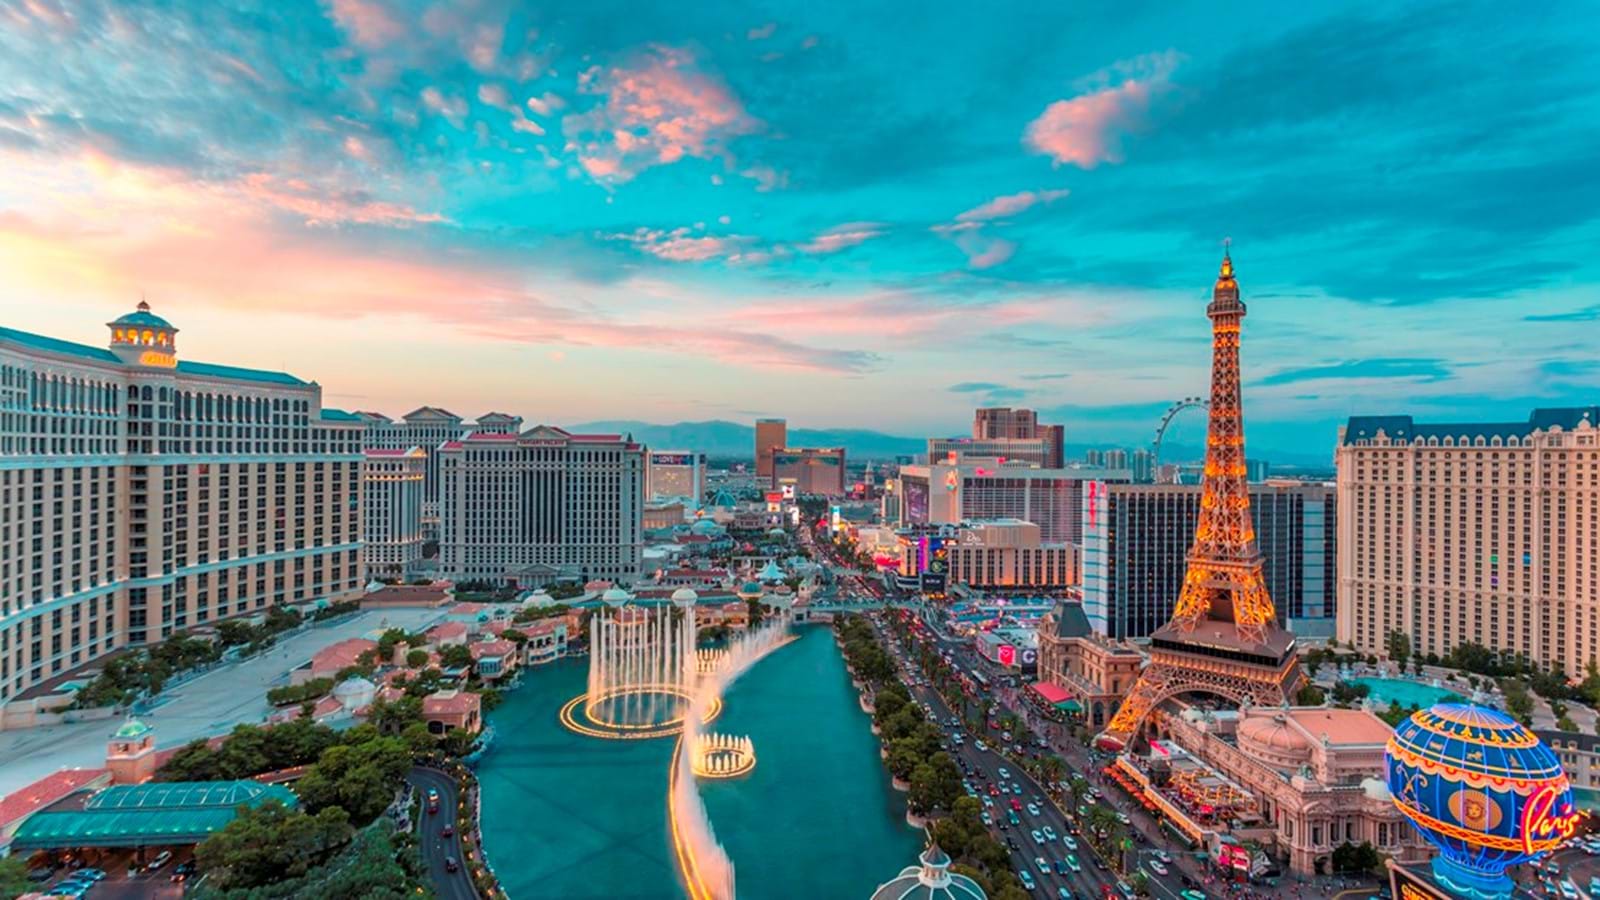 Unily reveals the latest innovations at Las Vegas's SharePoint Conference 